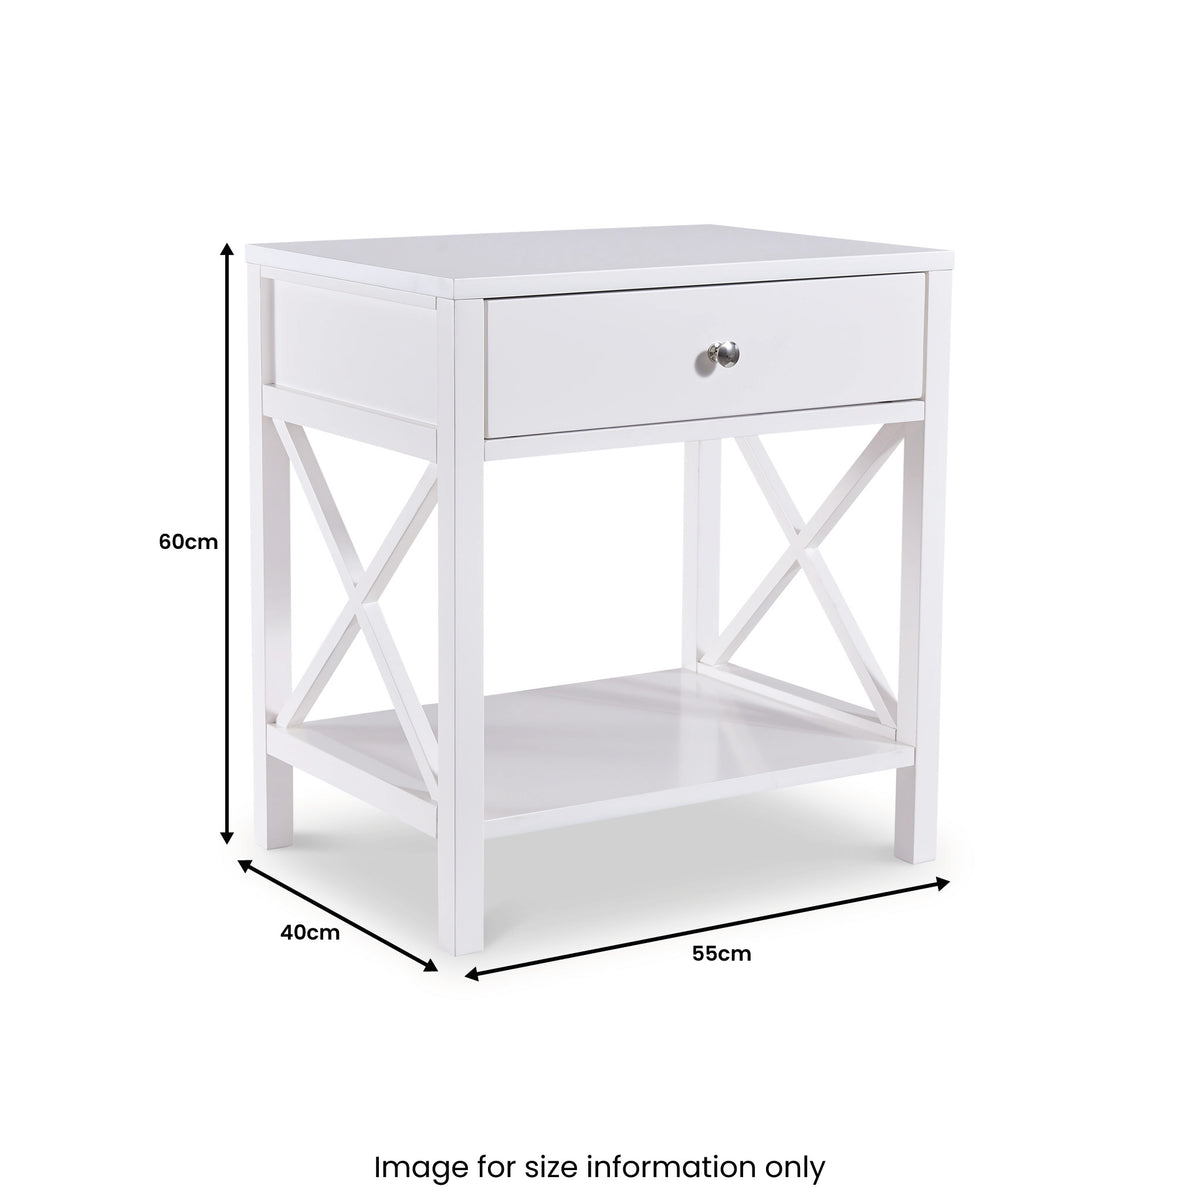 Leighton White 1 Drawer Bedside Table dimensions